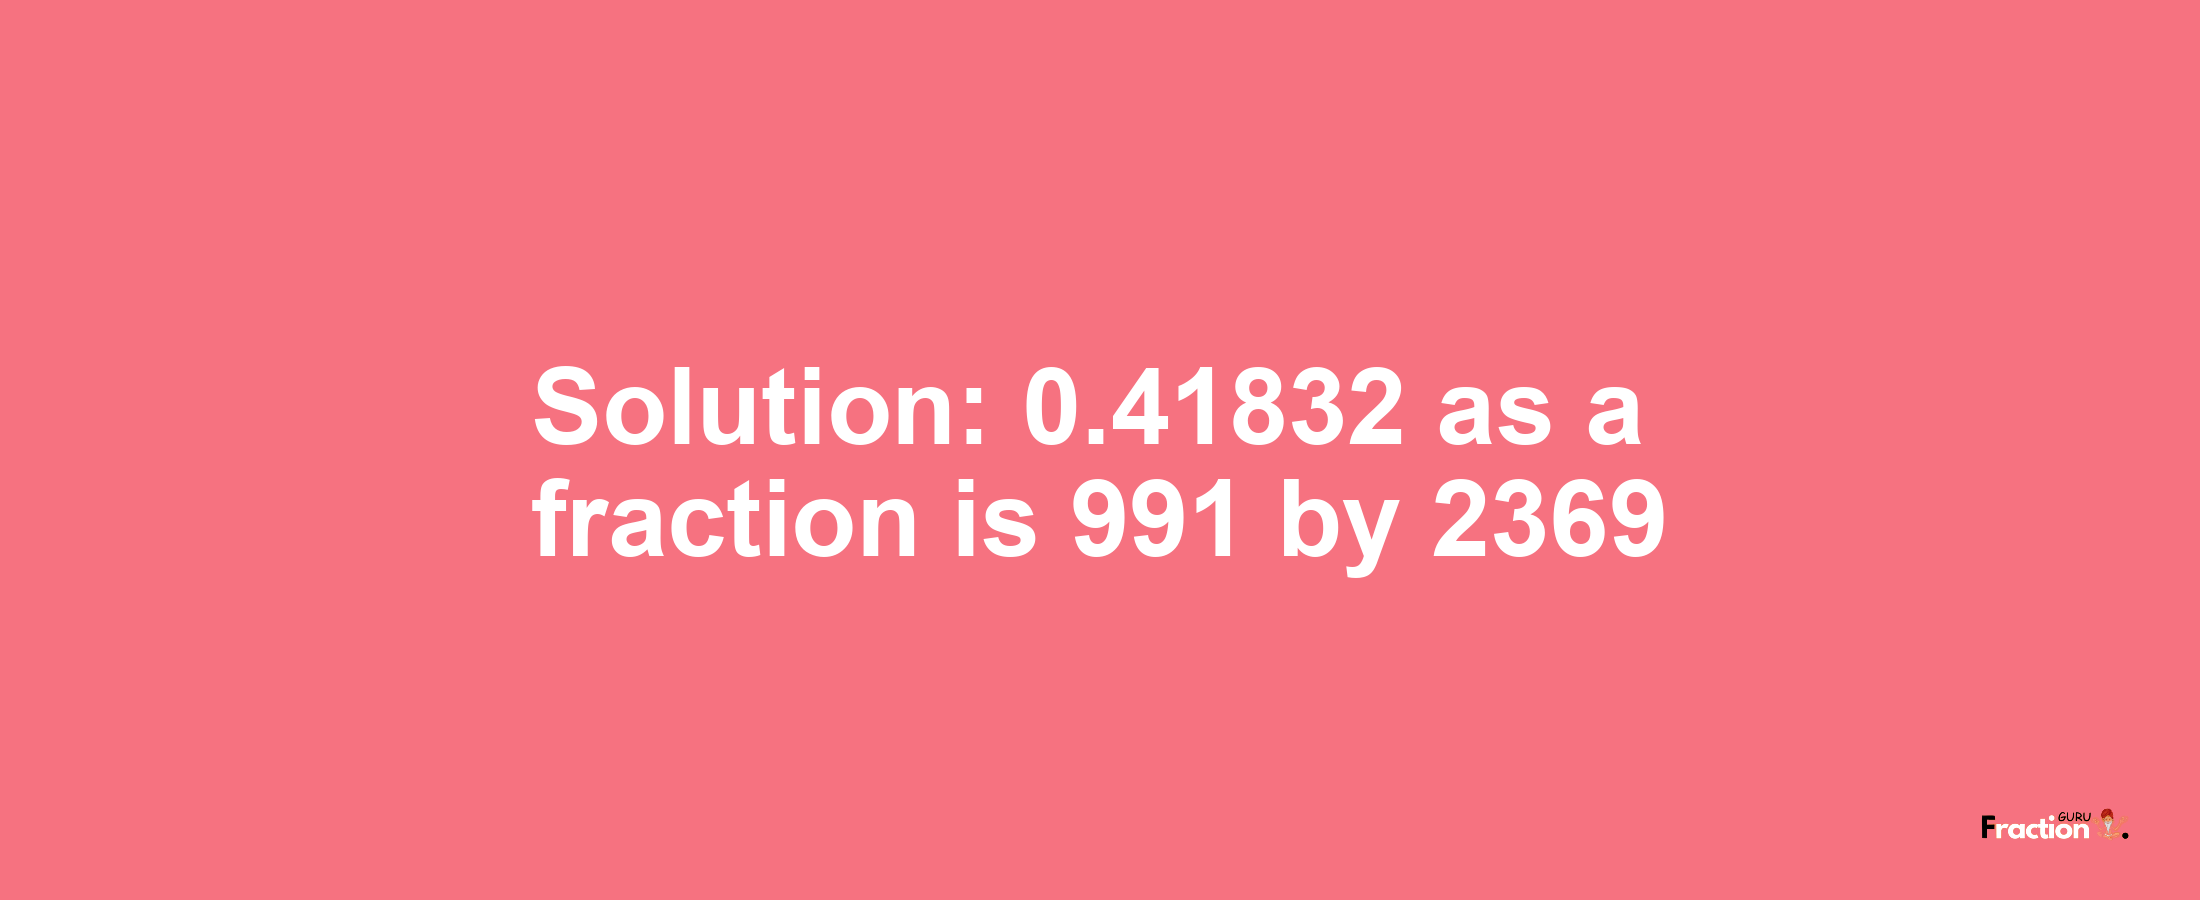 Solution:0.41832 as a fraction is 991/2369